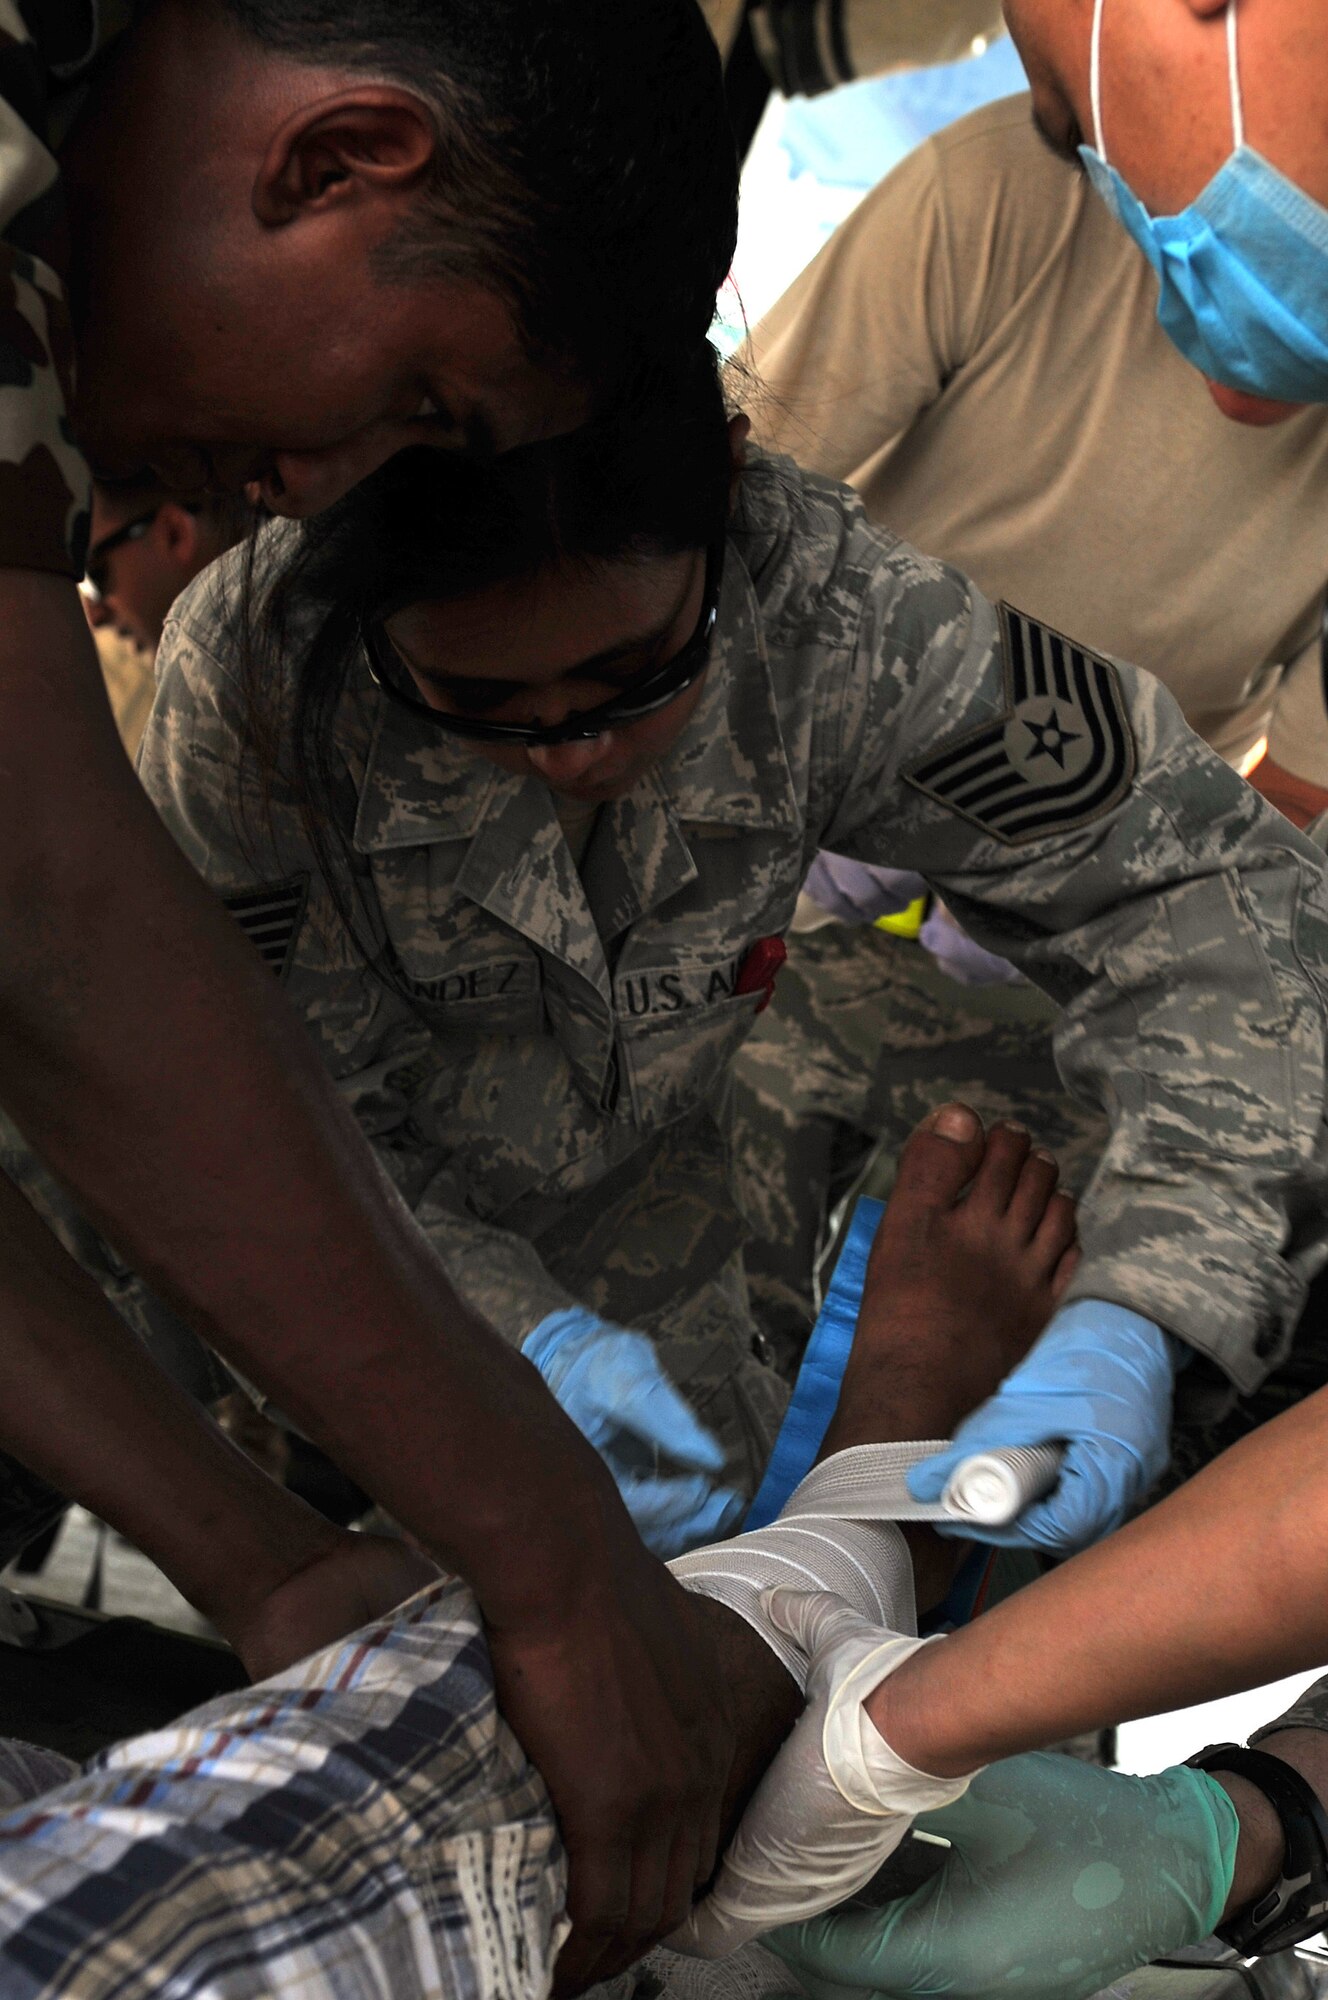 U.S. Air Force Tech Sgt. Honorata Fernandez, 36th Contingency Response Group independent duty medical technician, helps Nepalese army soldiers splint an earthquake victim's leg at the Tribhuvan International Airport in Kathmandu, Nepal, May 12, 2015. Joint Task Force-505 members worked with the Nepalese army to triage, treat and transport patients after a 7.3 magnitude earthquake struck the same day following a 7.8 magnitude earthquake that devastated the nation April 25, 2015. (U.S. Air Force photo by Staff Sgt. Melissa B. White/Released)